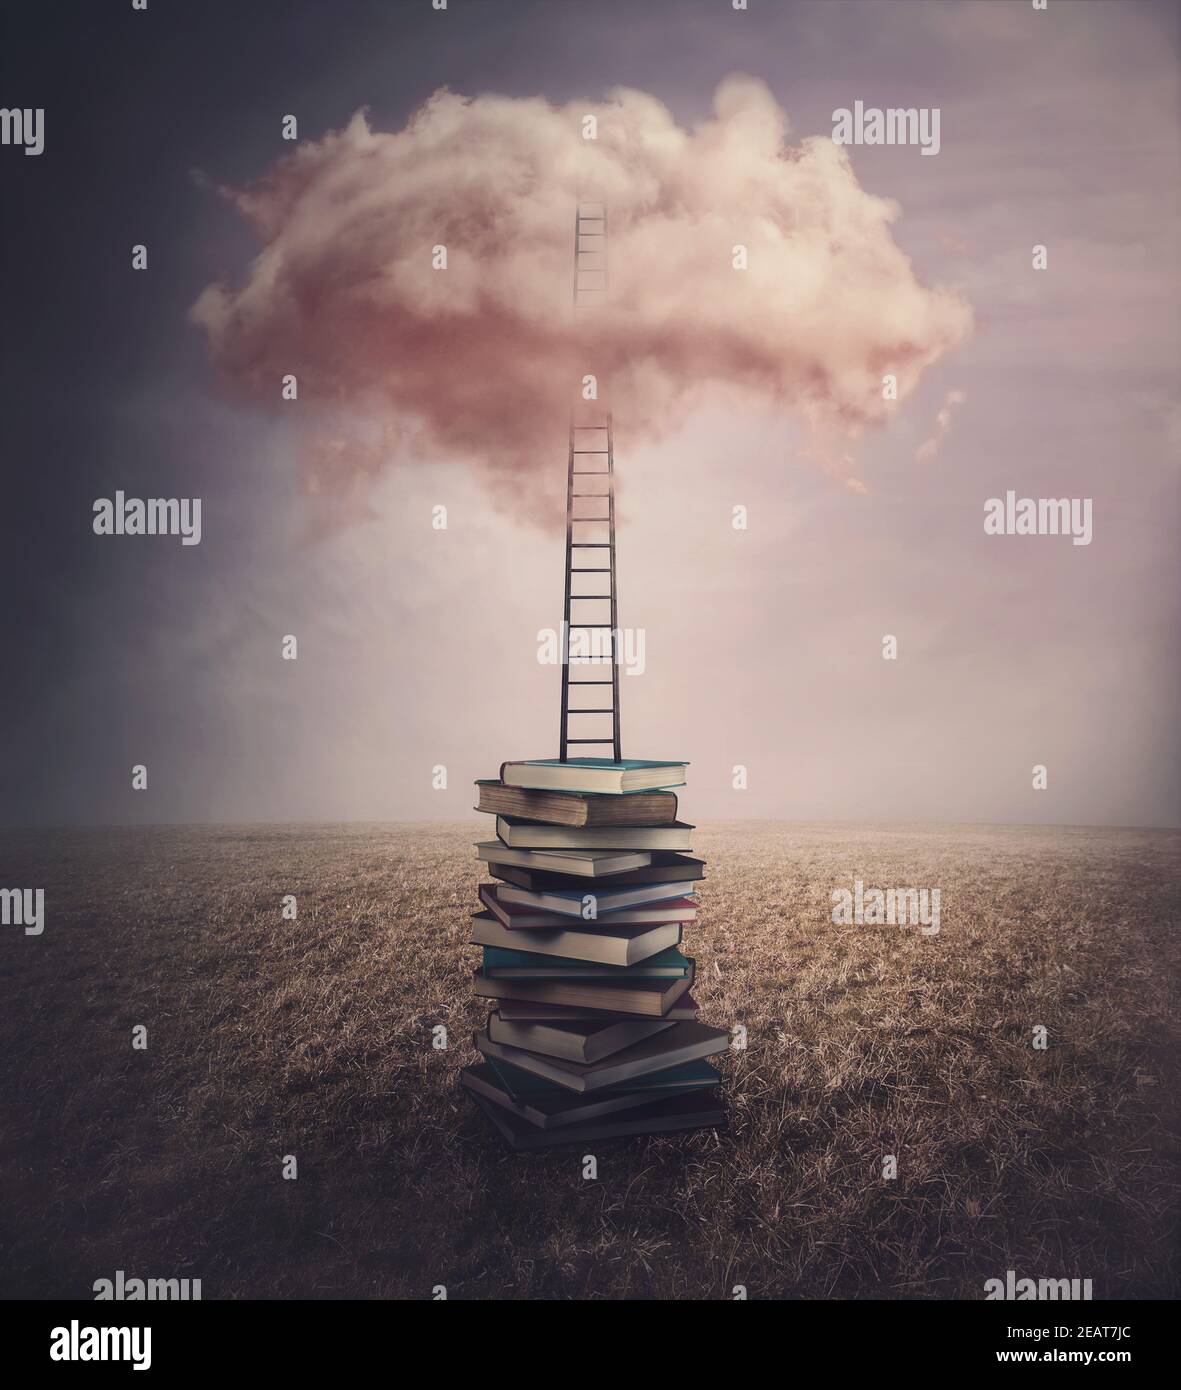 Surreal landscape, conceptual scene with a books pile in the middle of an open meadow, and a ladder or stairway leading up to a pink cloud in the sky. Fantasy world, adventure in search of knowledge Stock Photo